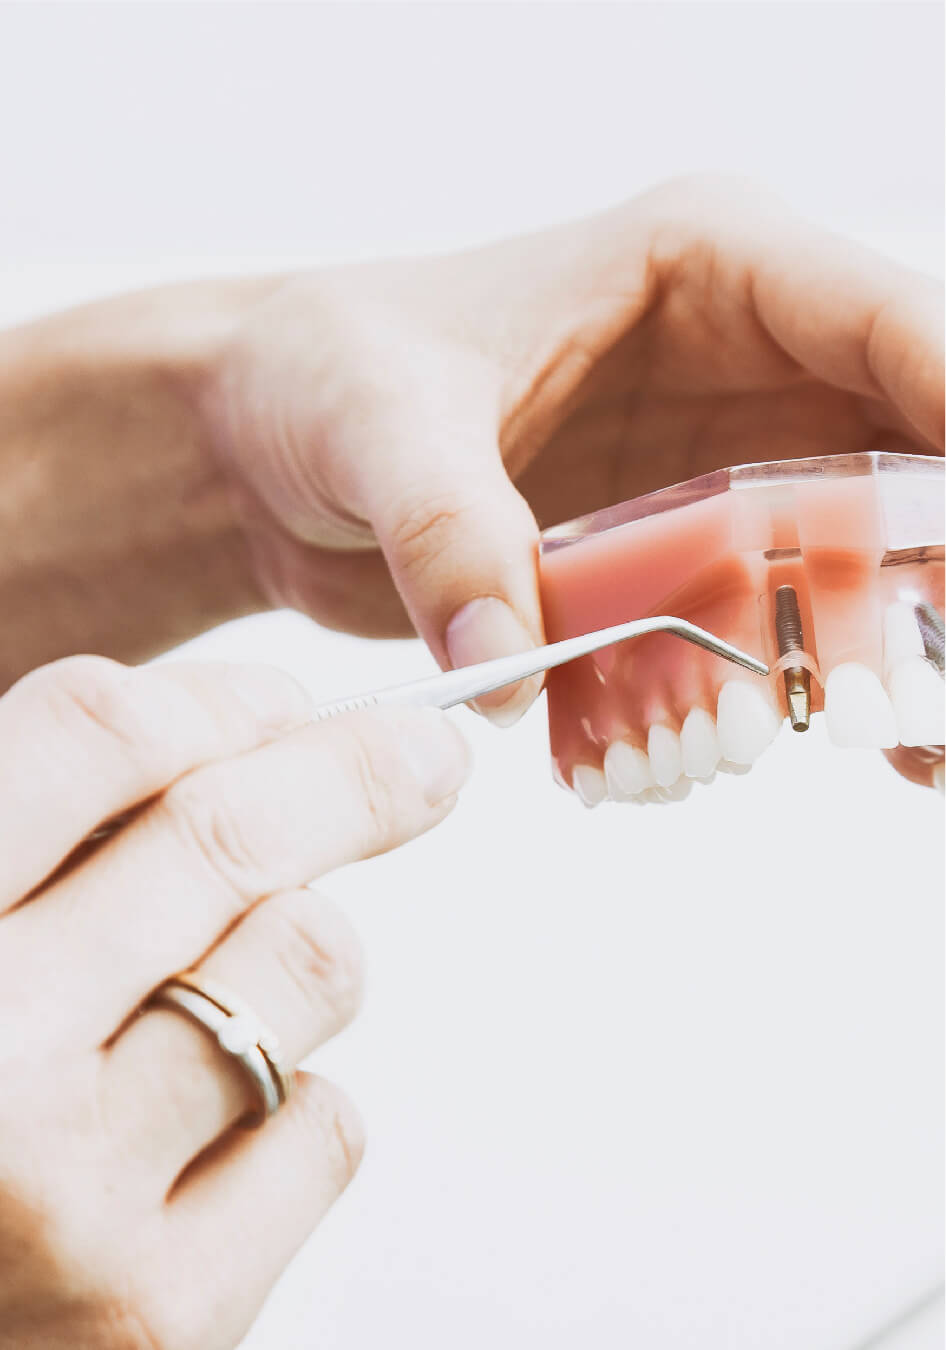 ALL ABOUT DENTAL IMPLANT MONTREAL